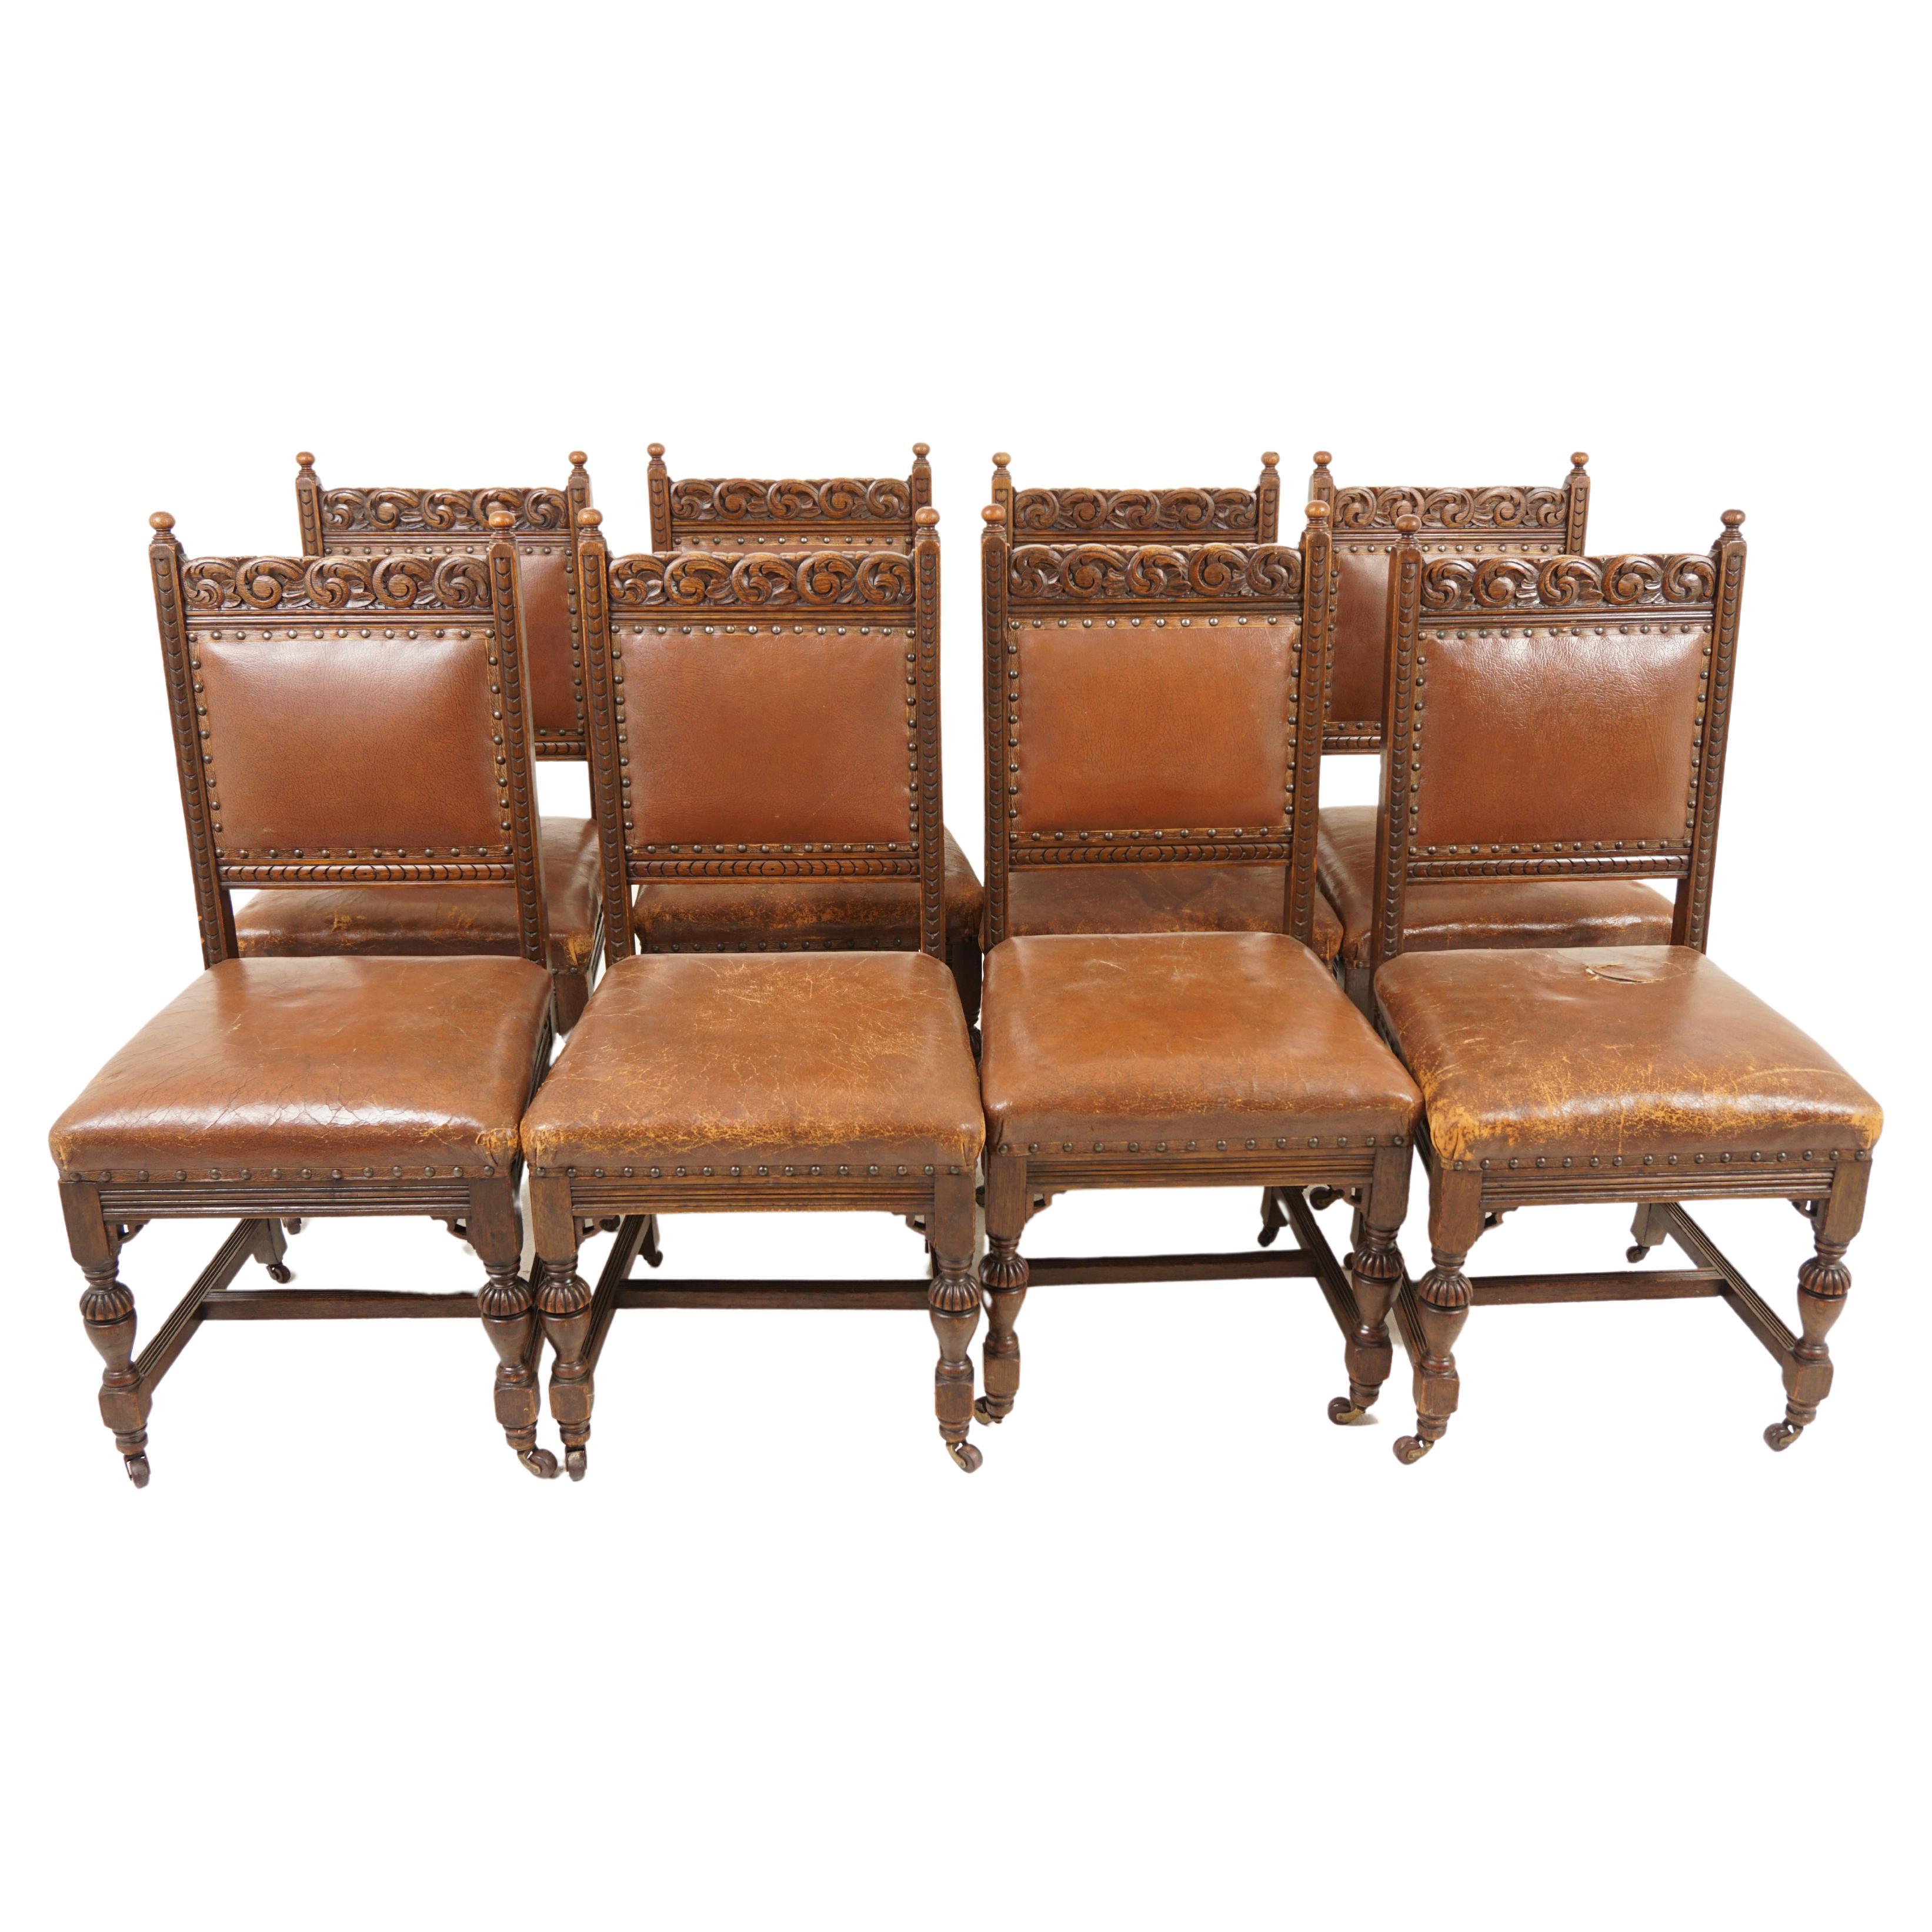 8 Victorian Carved Oak Leather Dining Chairs, Scotland 1890, H956